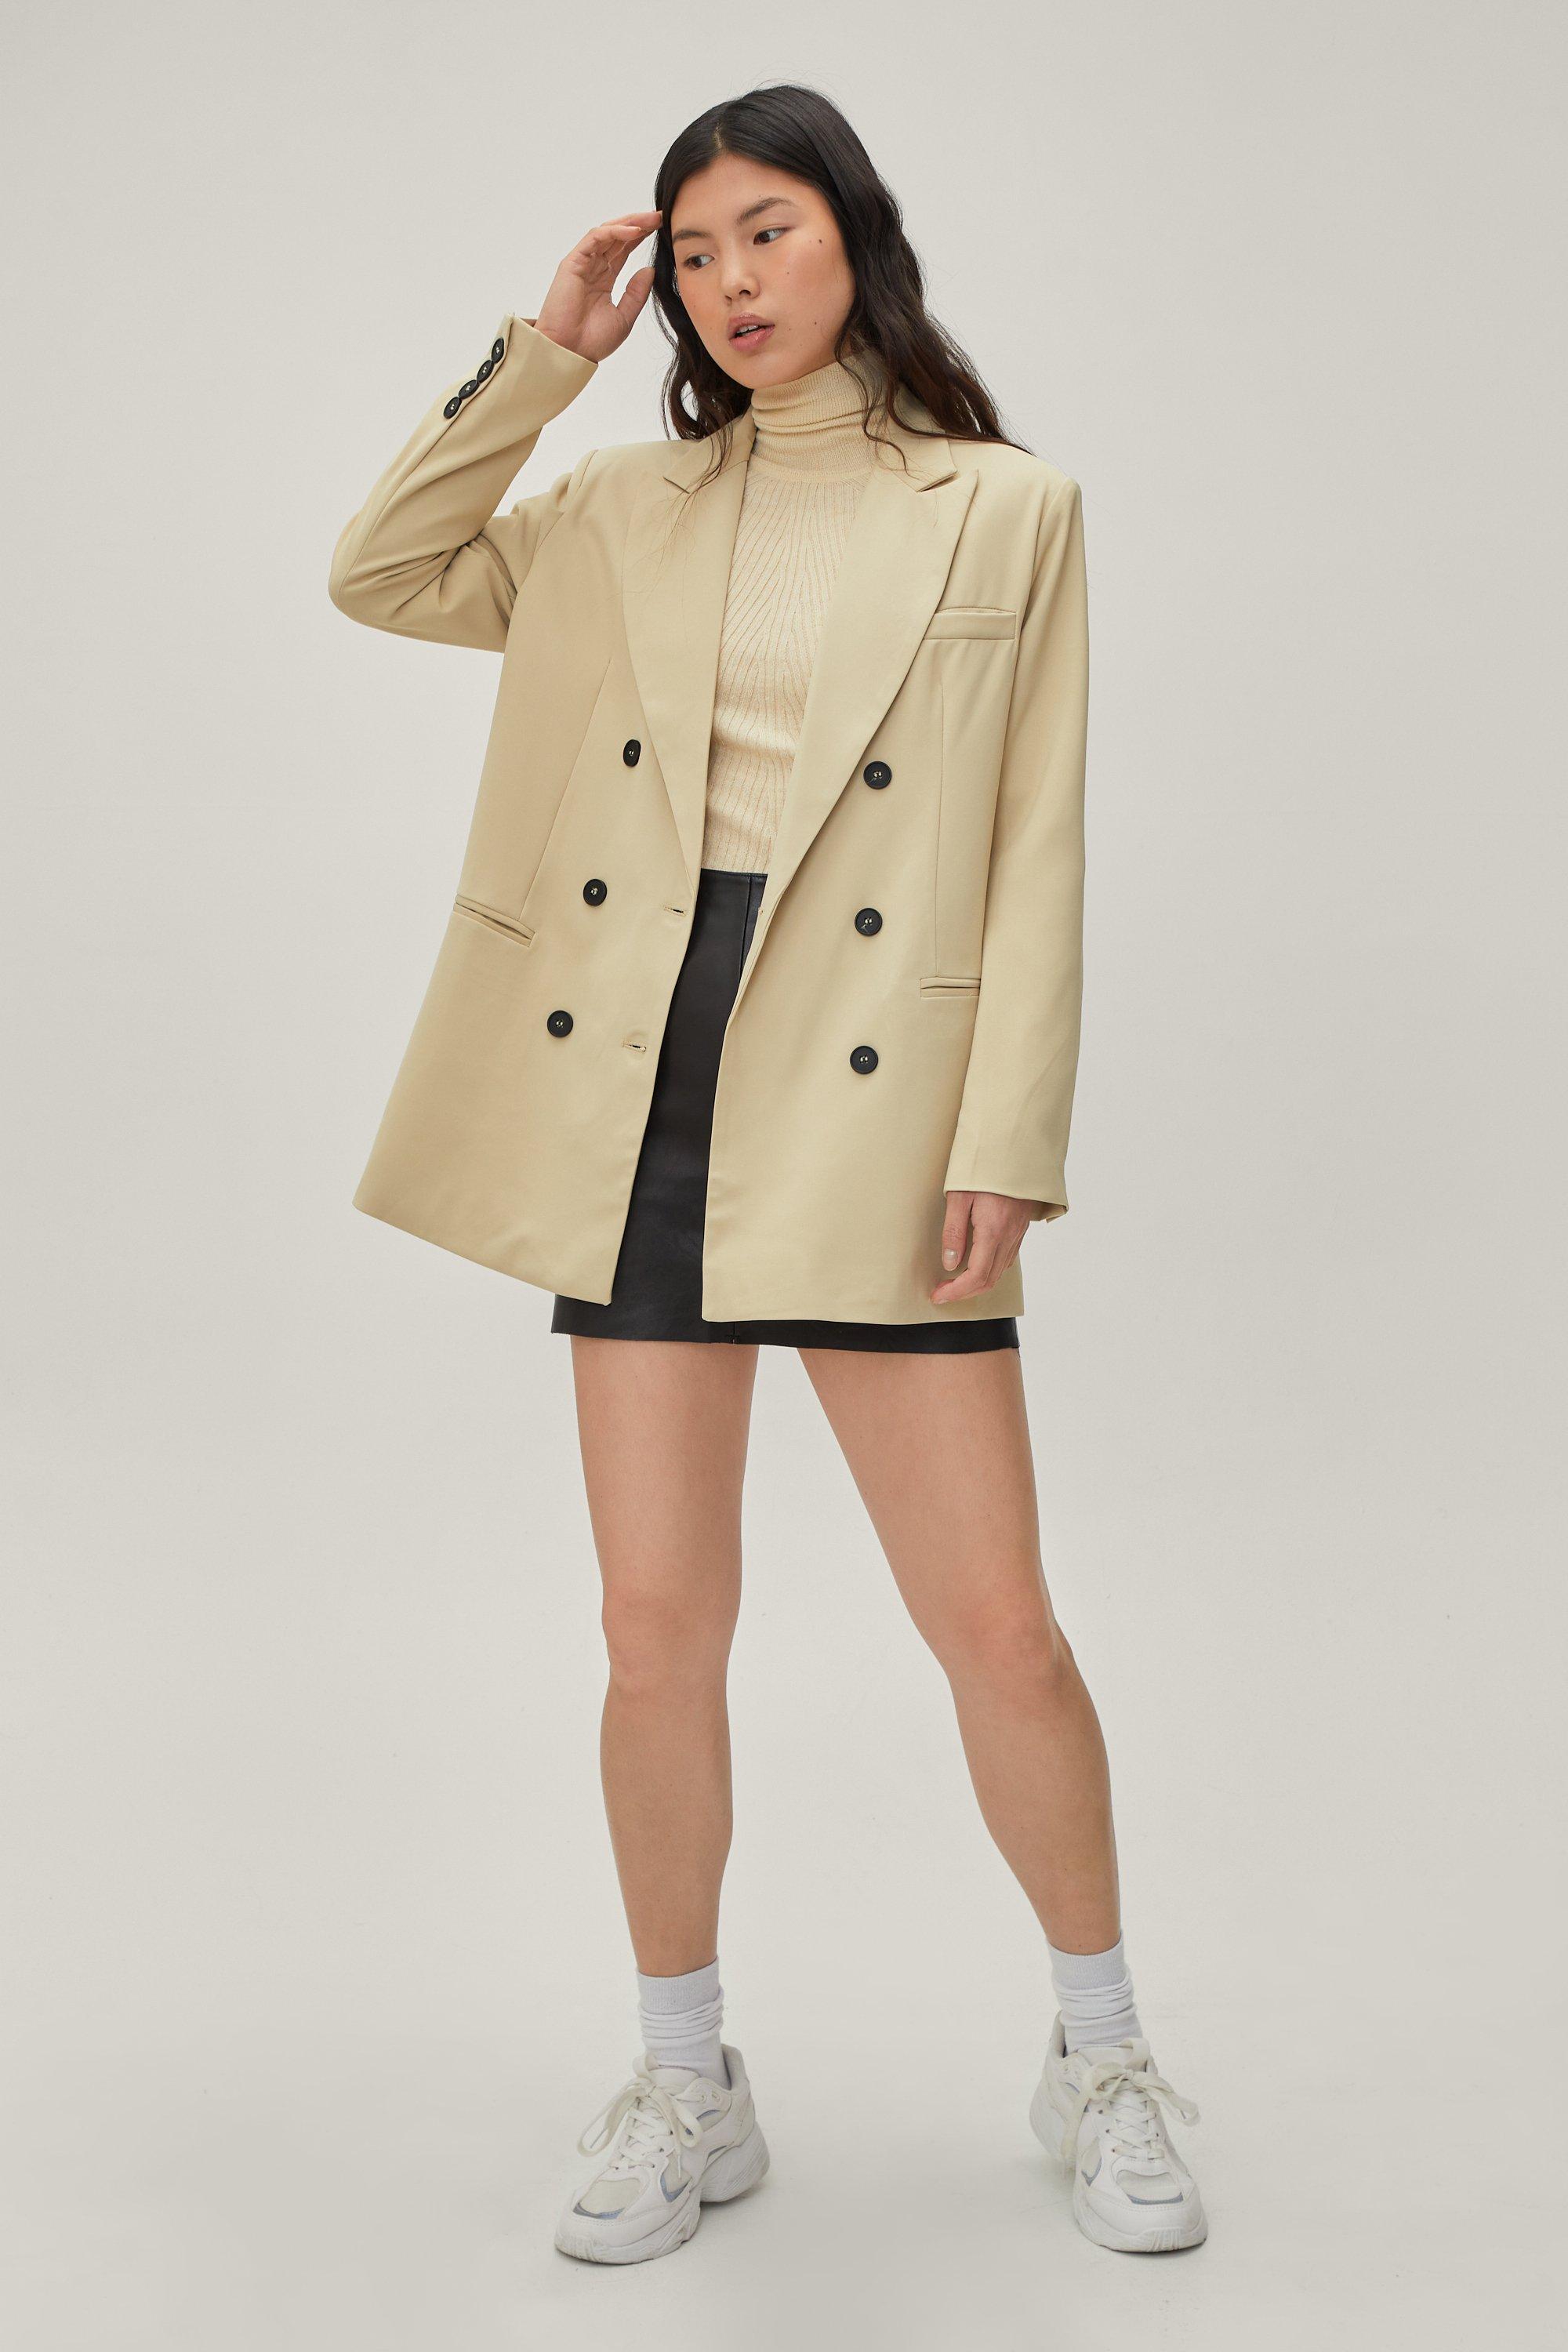 Oversized Double Breasted Tailored Jacket